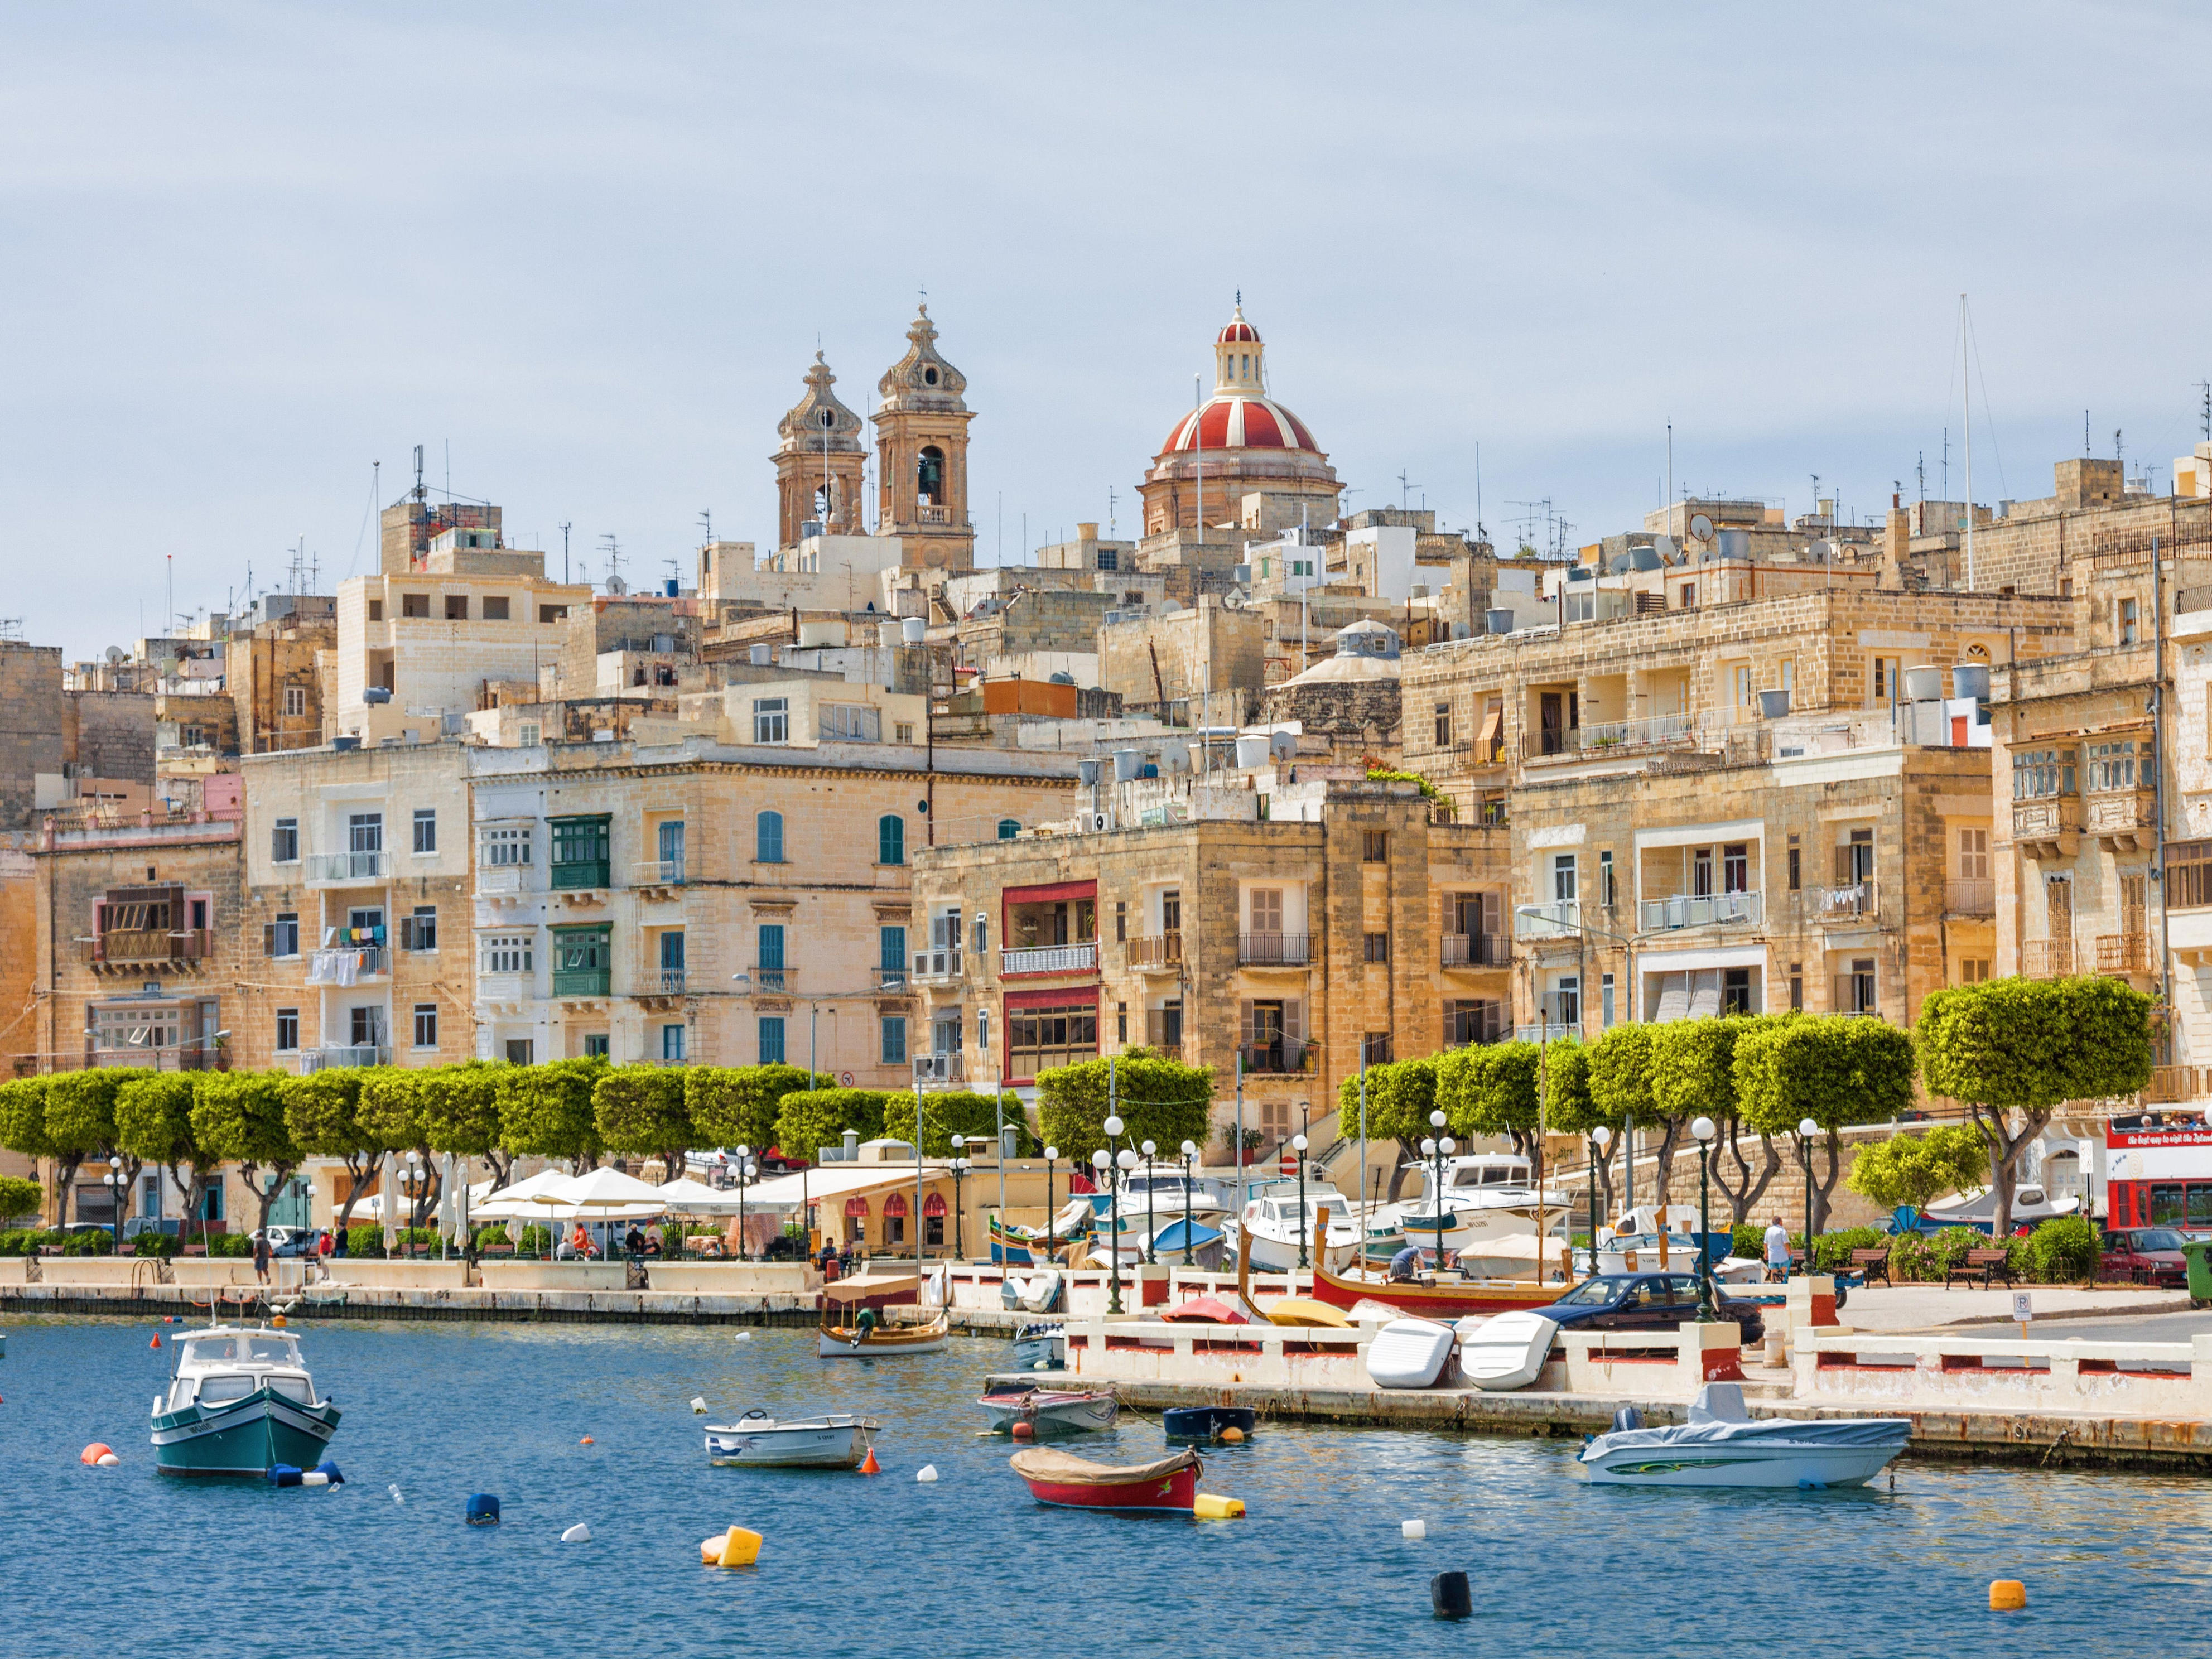 <p>My husband and I traveled to Malta during a <a href="https://www.businessinsider.com/best-things-to-do-london-england-what-to-skip-2024-1">trip to London</a>. The country had always been on my list of places to visit, as my grandfather was stationed there during World War II.</p><p>For such a small island nation, Malta packs a big punch when it comes to things to see and do. For example, the walled capital city of Valletta is a <a href="https://whc.unesco.org/en/list/131/">UNESCO World Heritage Site</a>. We loved wandering its streets and taking in the fortifications, churches, and Baroque architecture.</p><p>Visiting the Blue Grotto, which is a series of sea caves, was also breathtaking and a highlight of our trip.</p>